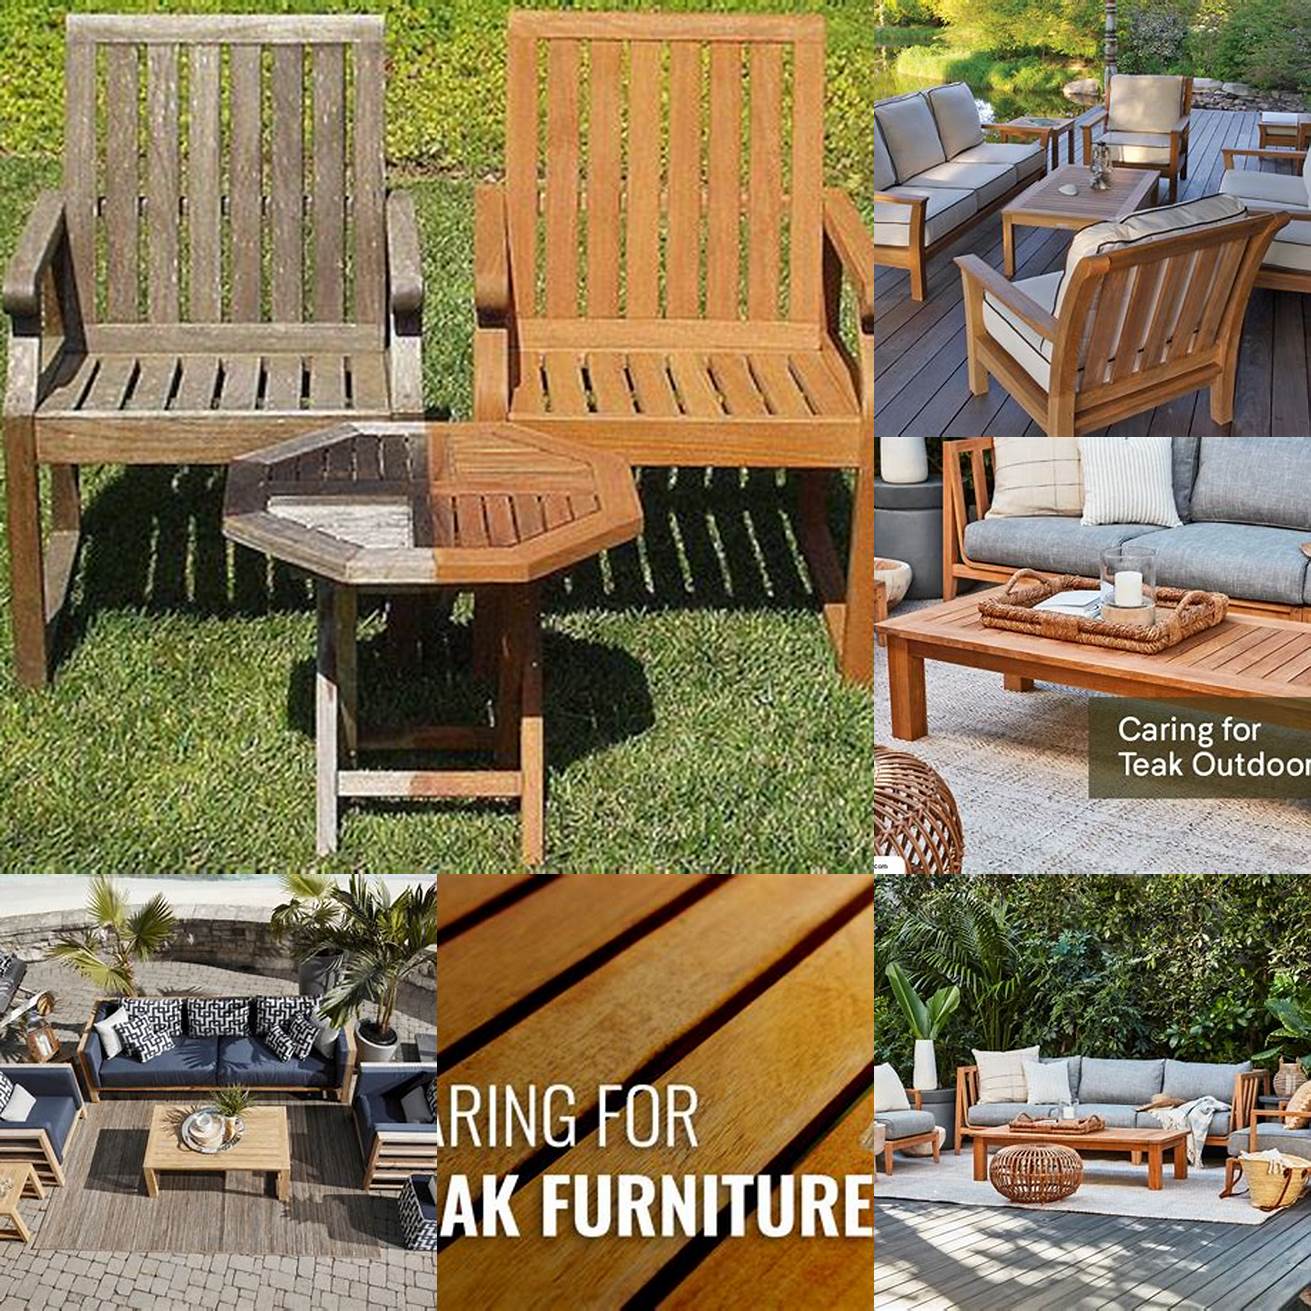 Caring for Your Teak Furniture